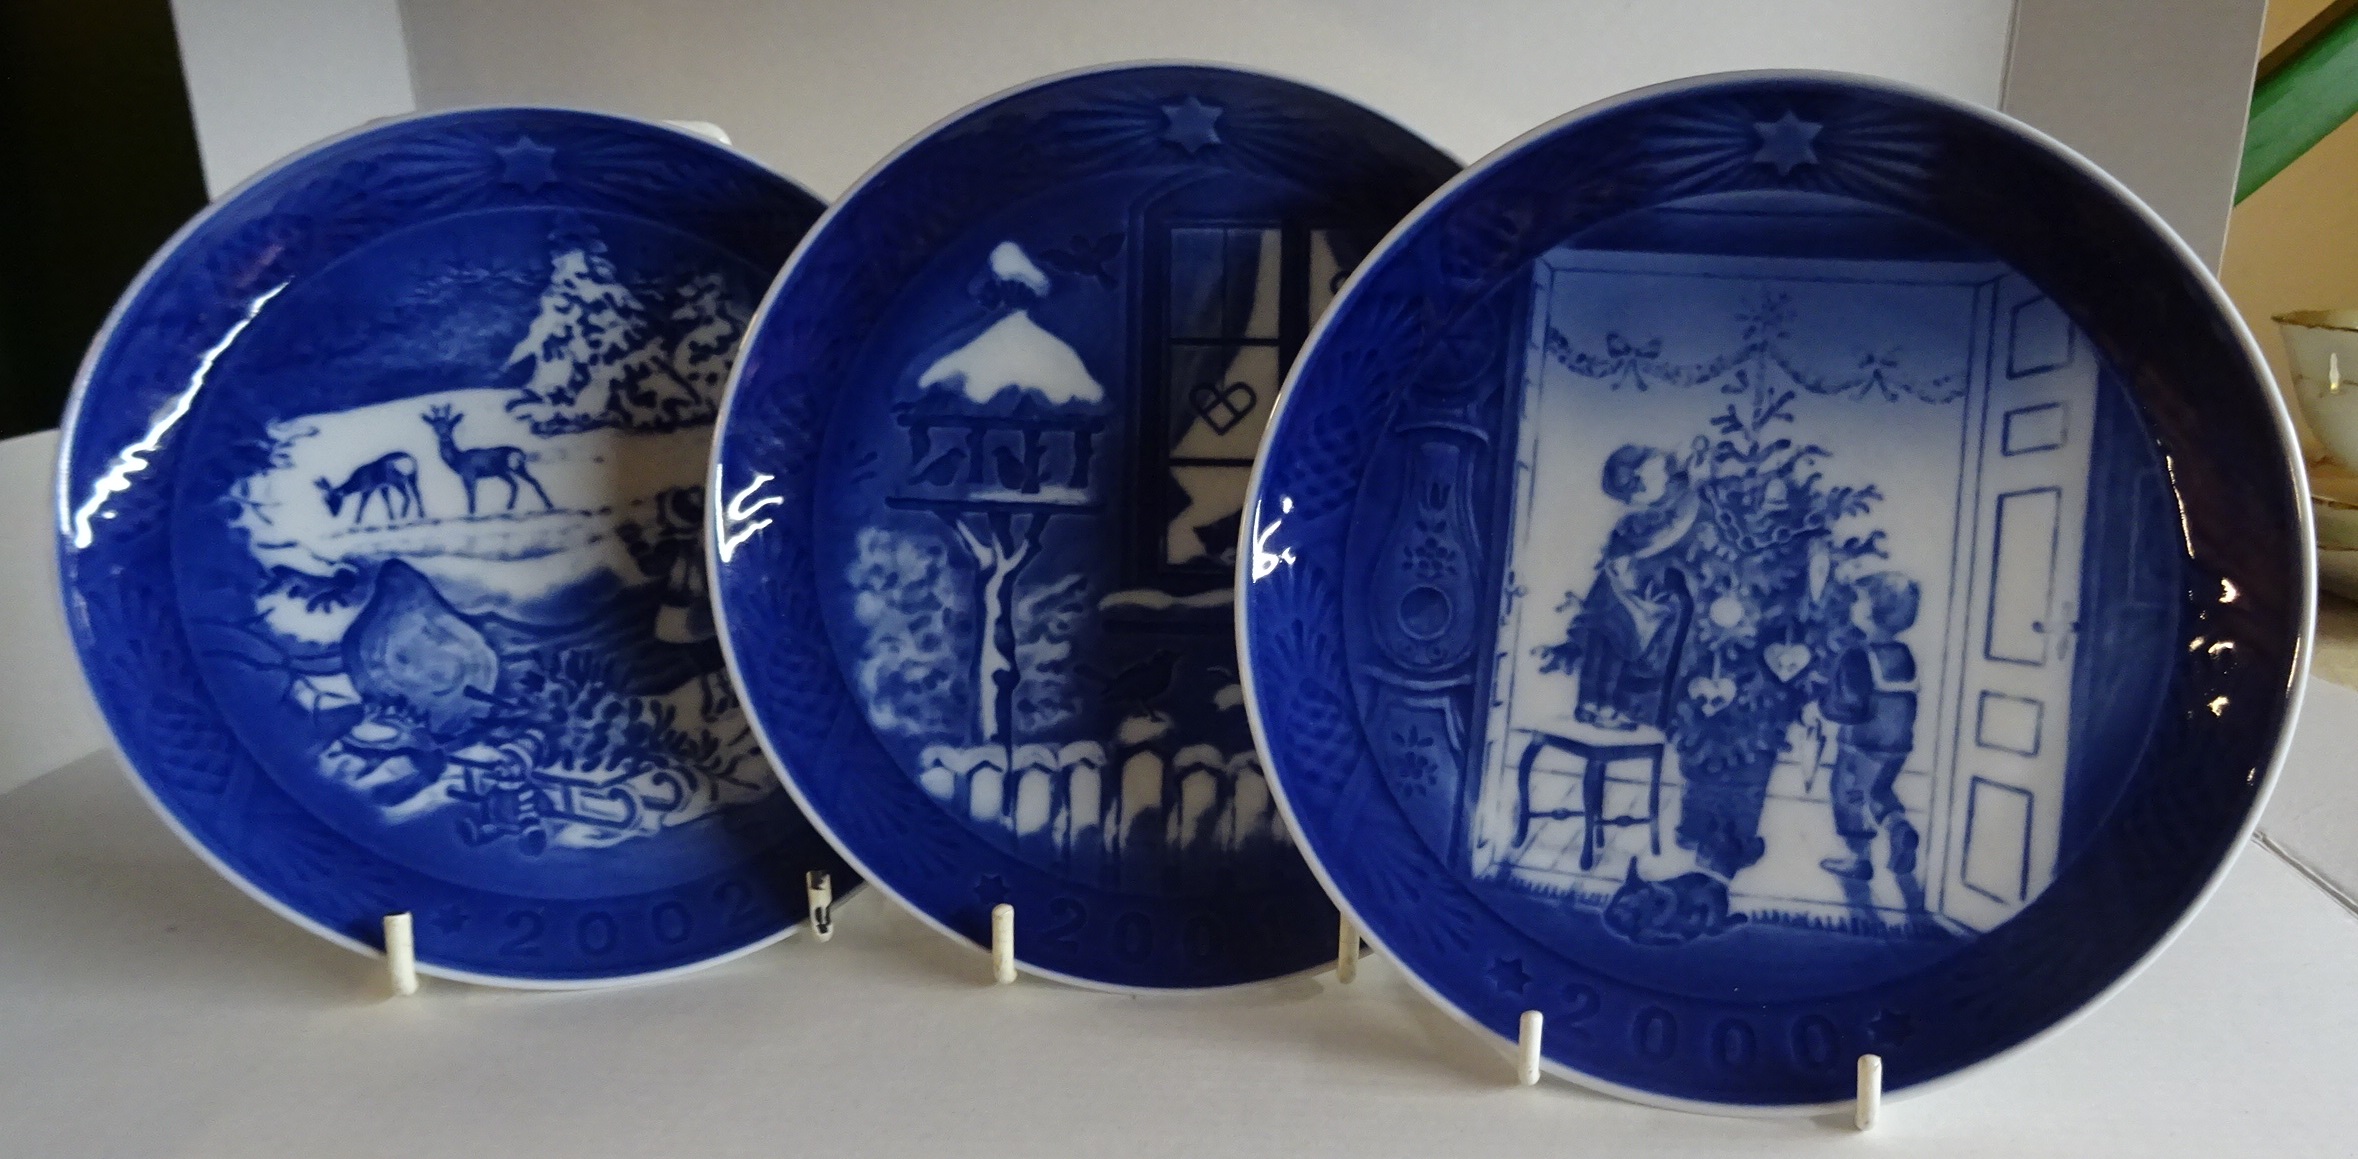 A collection of thirty two Royal Copenhagen Christmas Plates from 1971-2002.